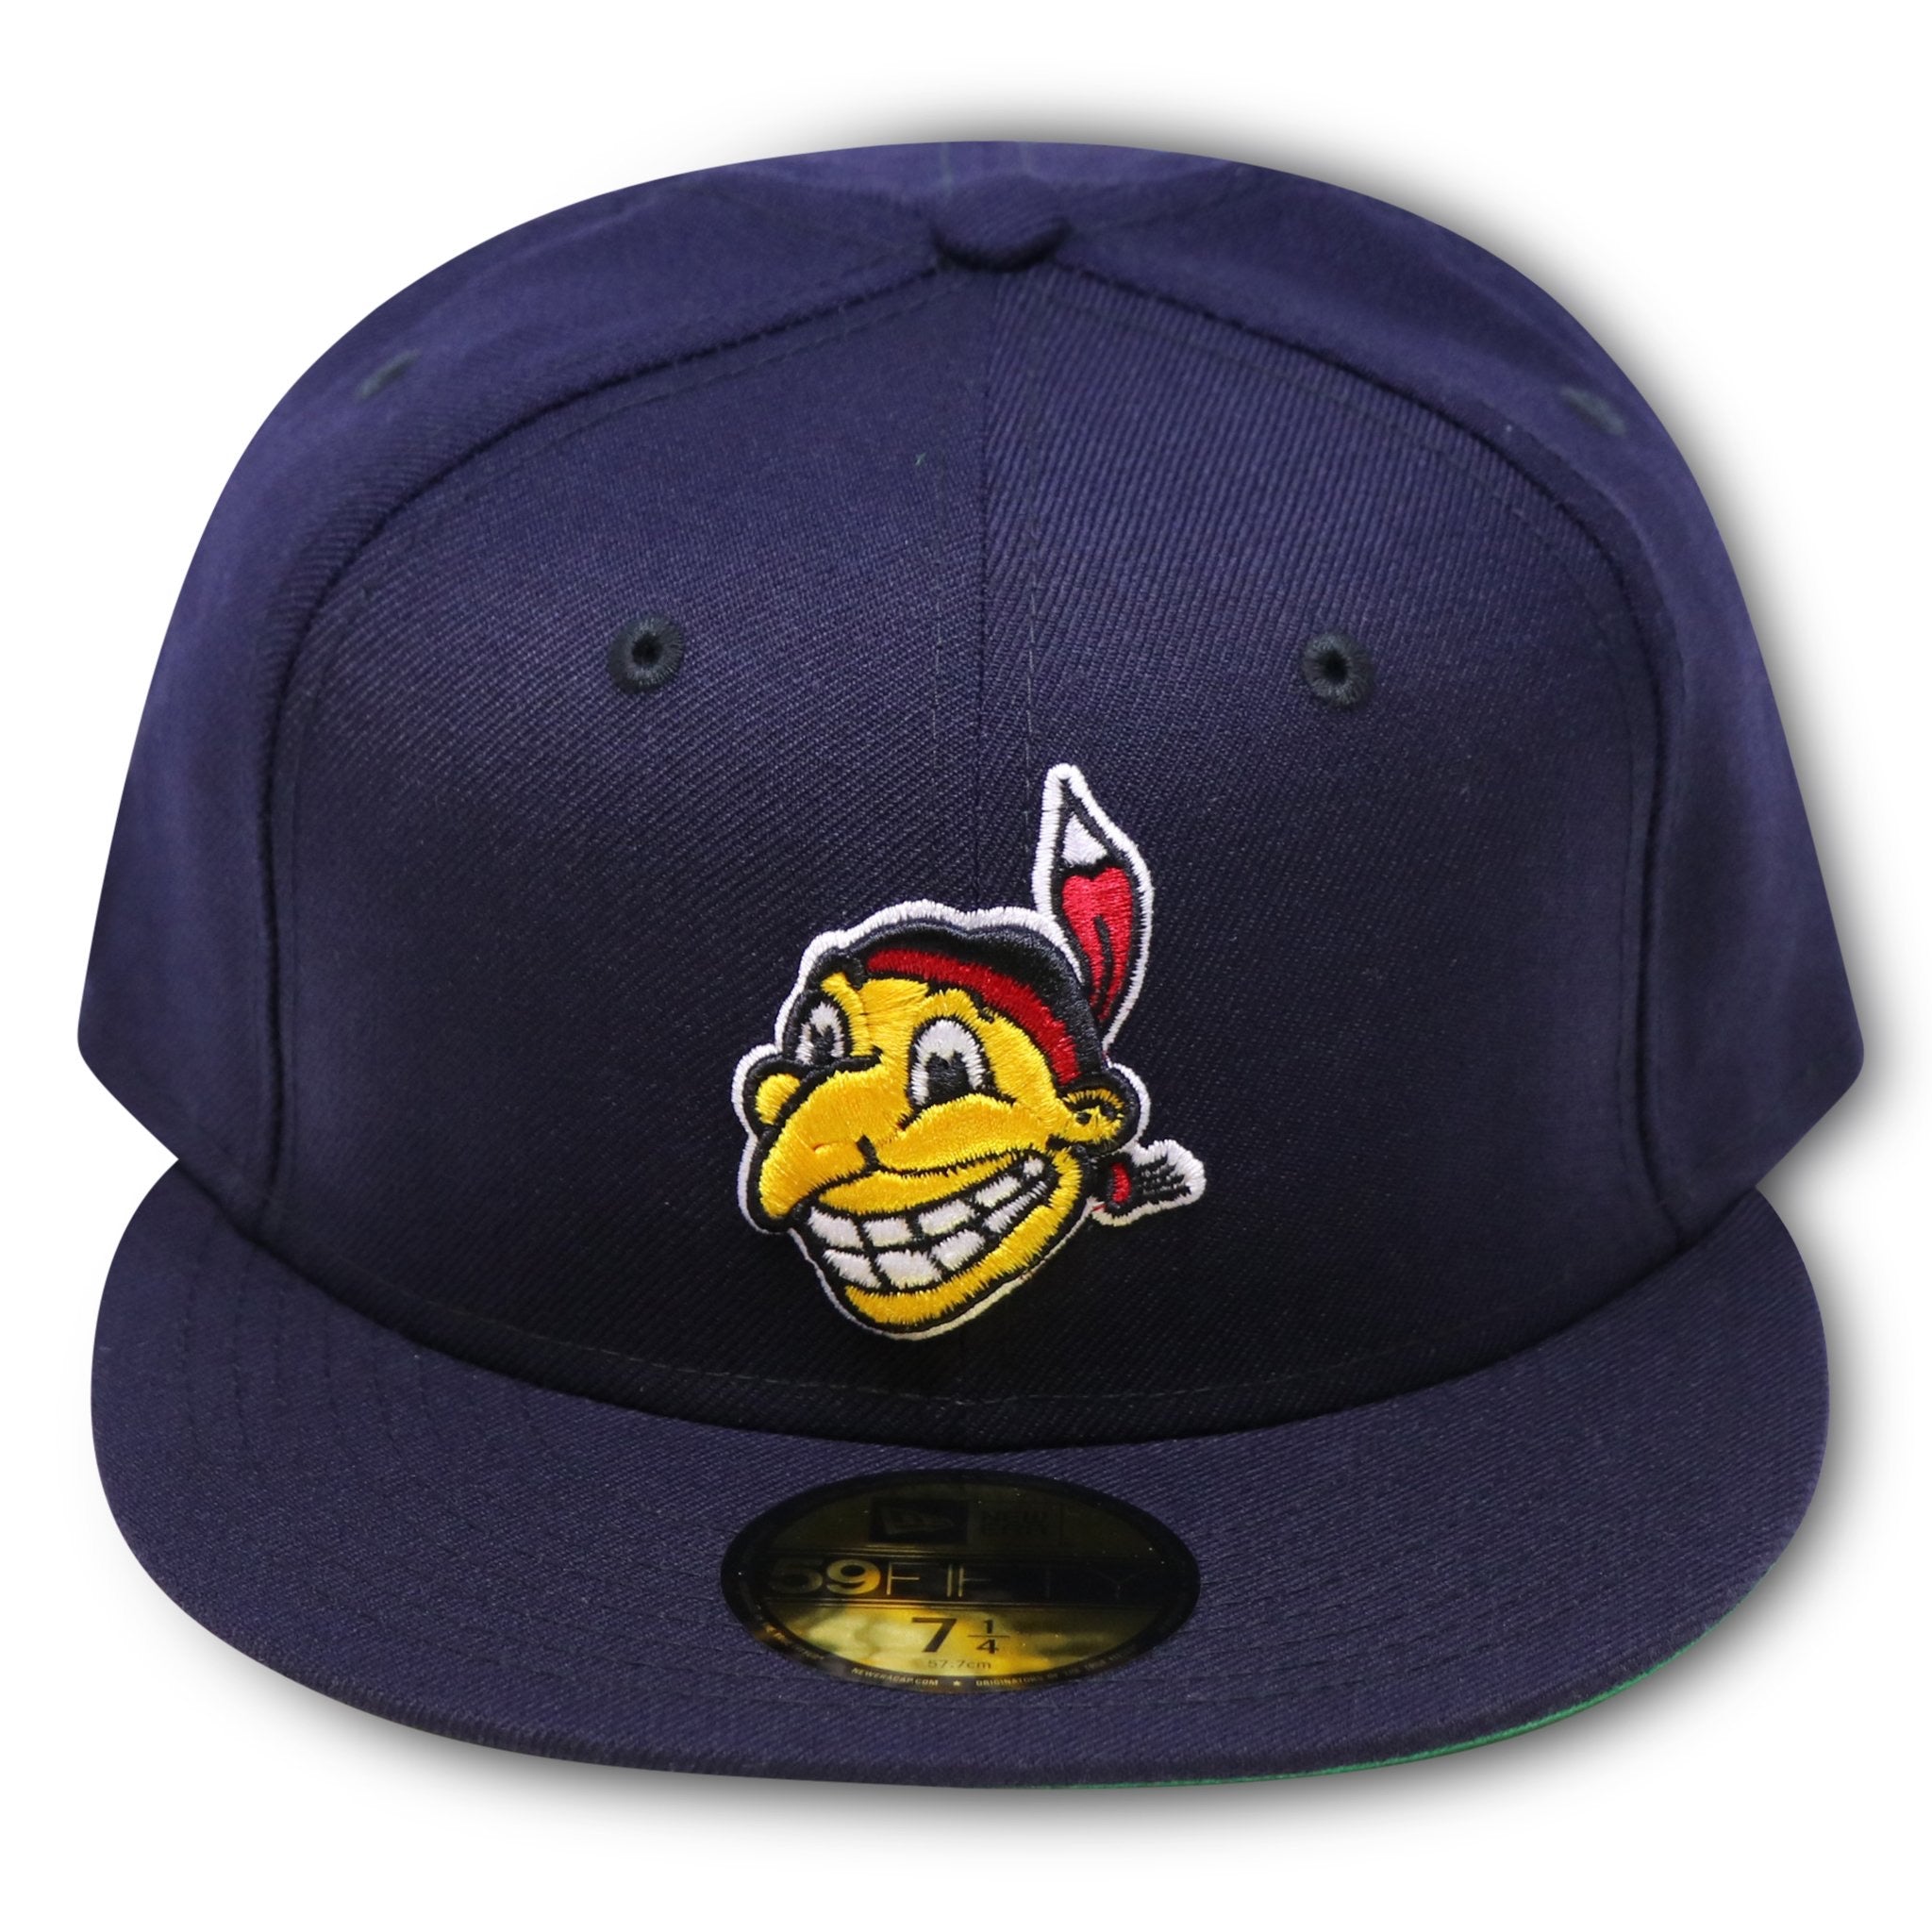 CLEVELAND INDIANS (1947-1950 LOGO) NEW ERA 59FIFTY FITTED (GREEN BOTTOM)  (ST)